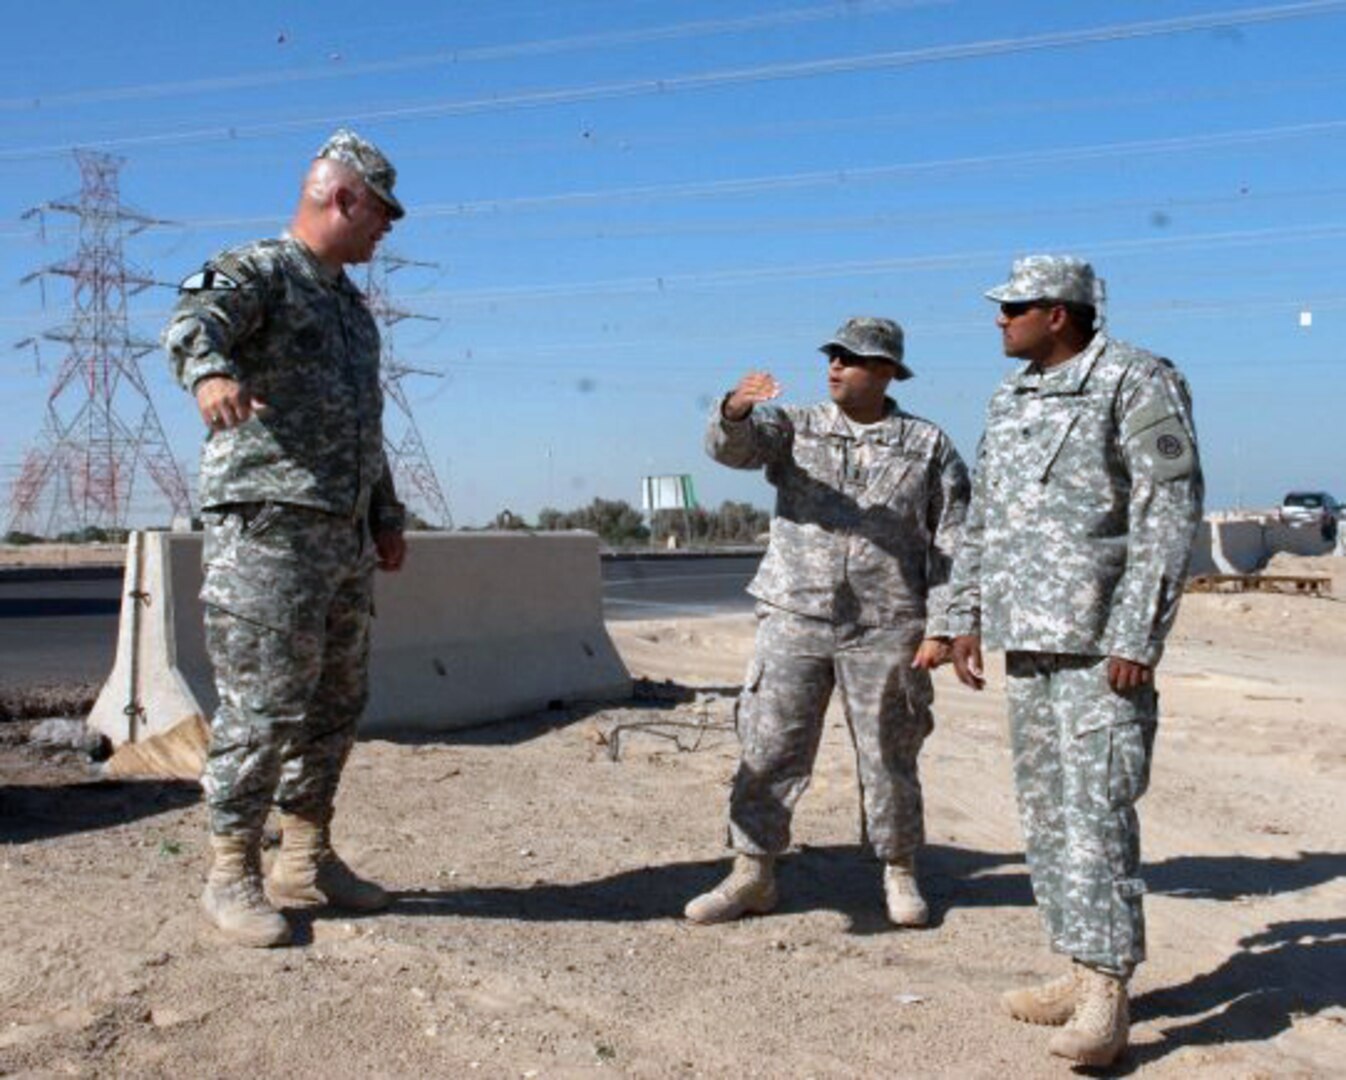 Master Sgt. Steve Kirby, force protection NCO for ASG Kuwait, left, 1st Lt. Teofilo Espinal, Base Defense Liaison Team (BDLT) officer-in-charge, center, and Staff Sgt. Miguel Santiago plan the placement of concrete barriers just outside the camp here in October.